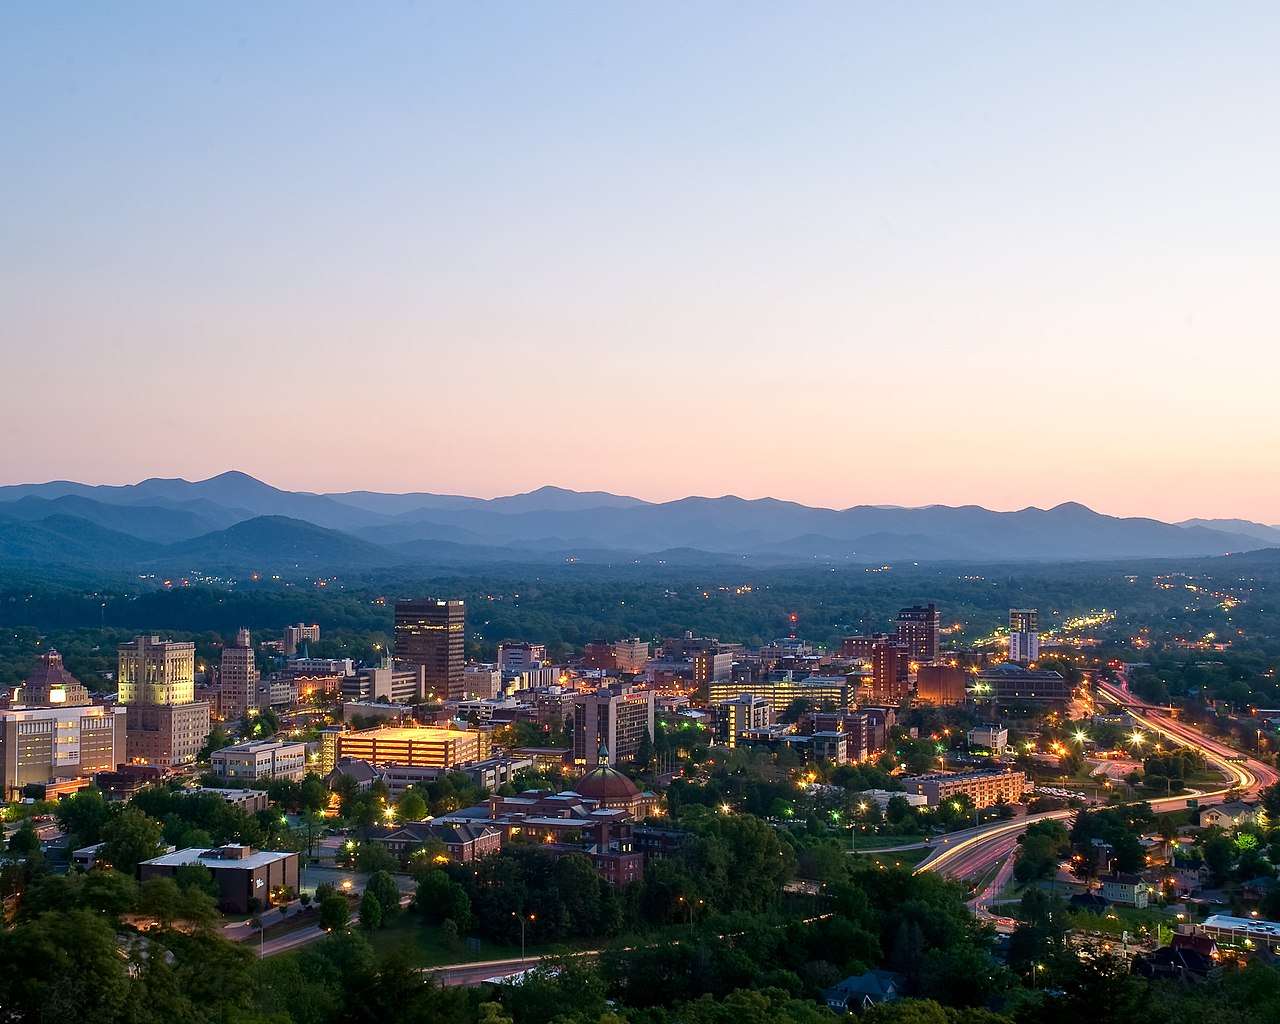 Can you find any good kid-friendly restaurants in Asheville?